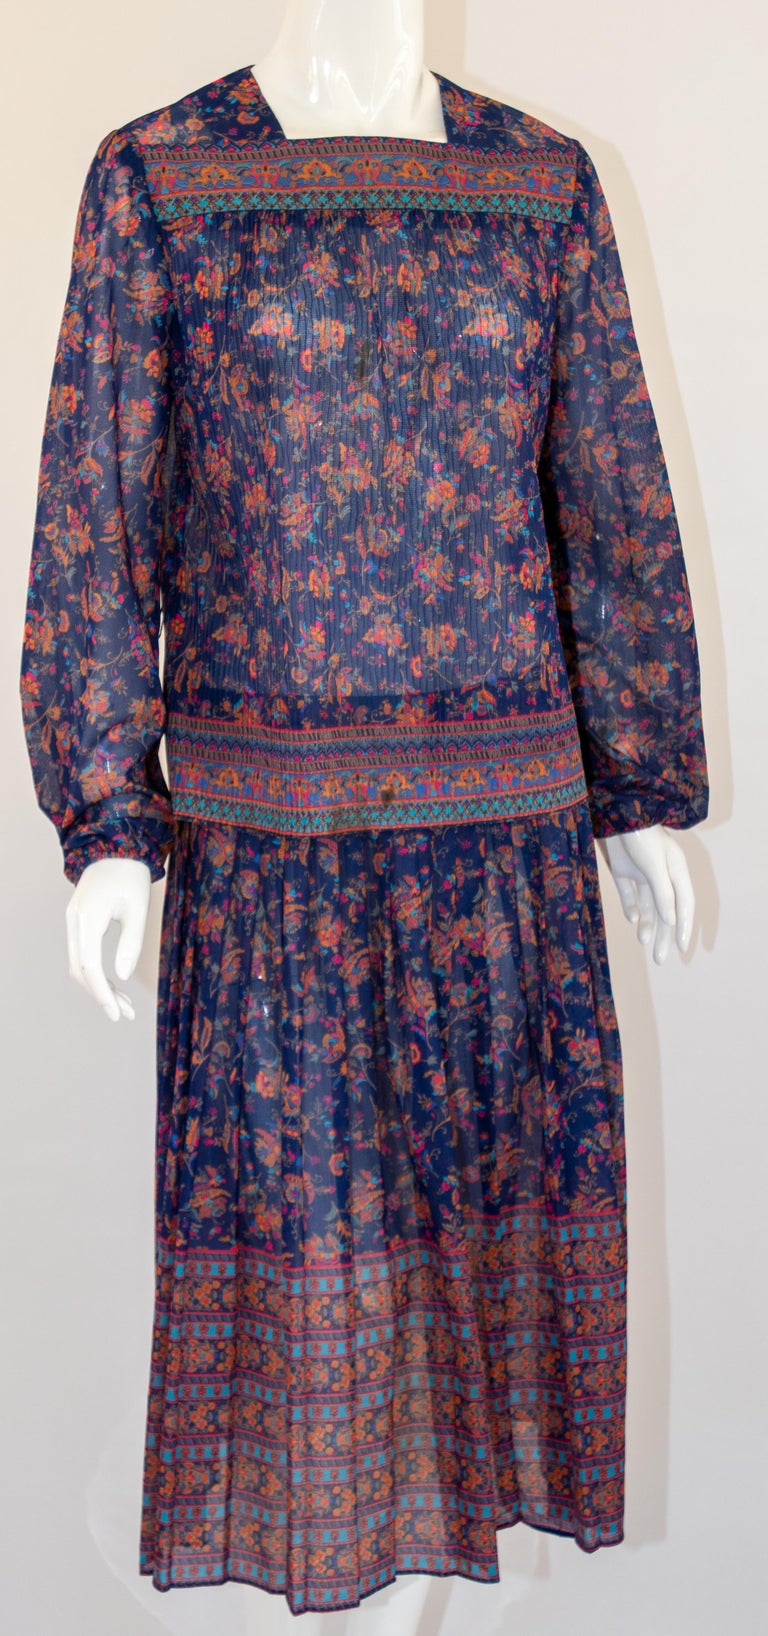 1970s Vintage Miss Magnin at I. Magnin.
1970s Joseph Magnin Bohemian floral printed blouse and skirt.
Printed bohemian dress featuring a floral print in violets and blues, this floral design pattern mixed together to create a stunning vintage